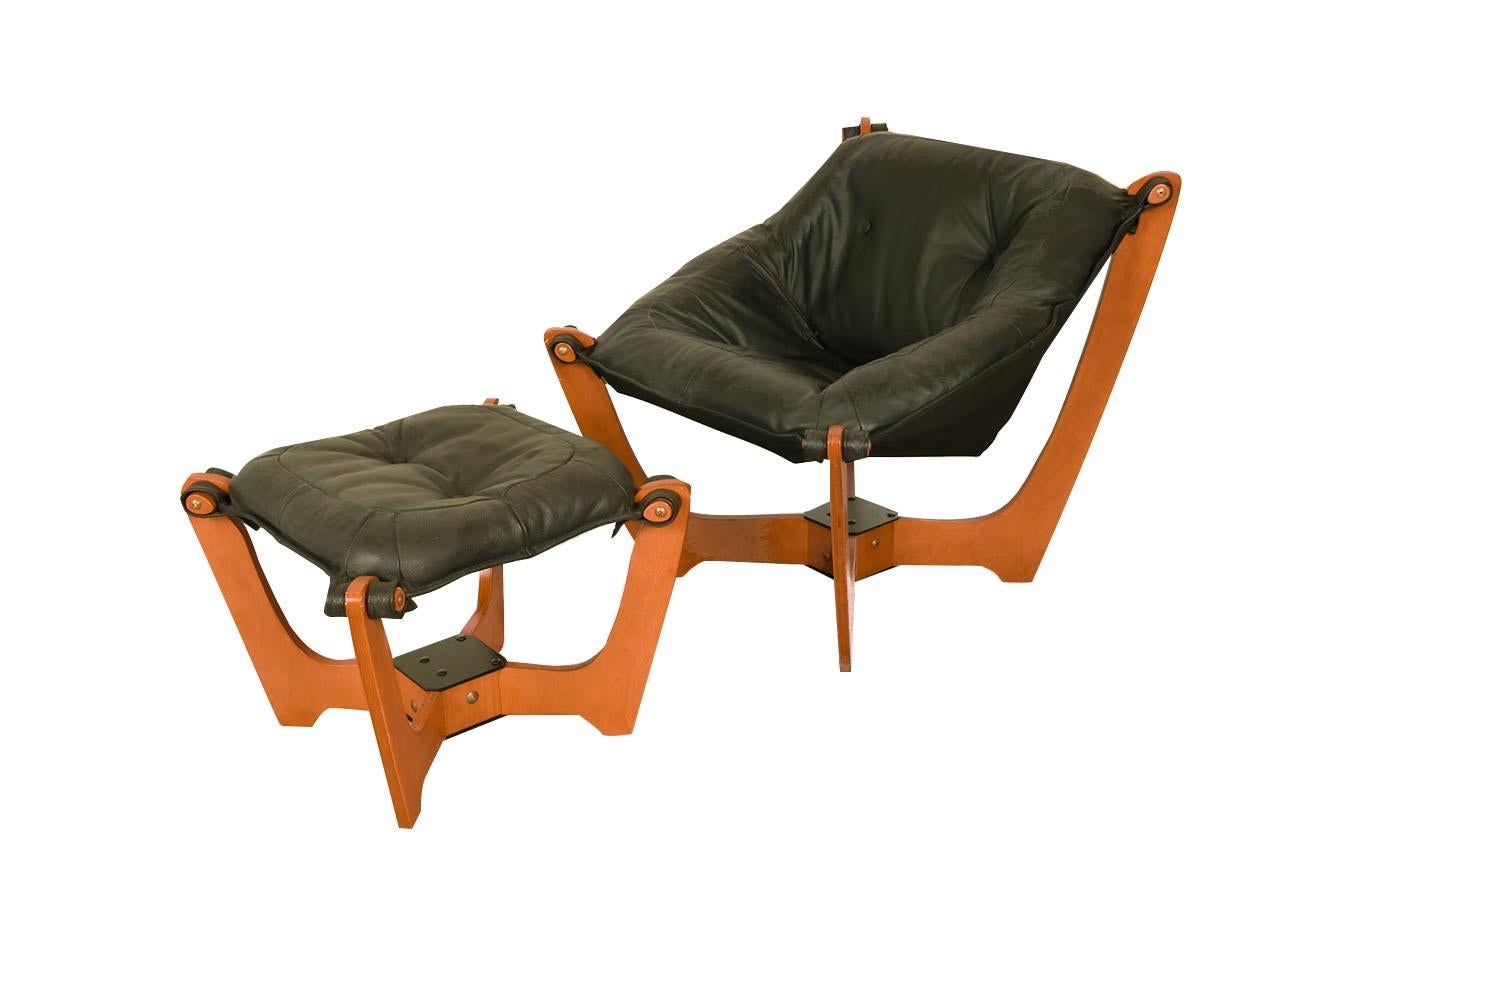 A beautiful Mid-Century Modern, stylish leather Luna Sling lounge chair and ottoman circa 1970s product by Hjellegjerde group of Norway. Features rich, soft, black leather upholstery, in a light color wood frame. The sculptural frame with low back